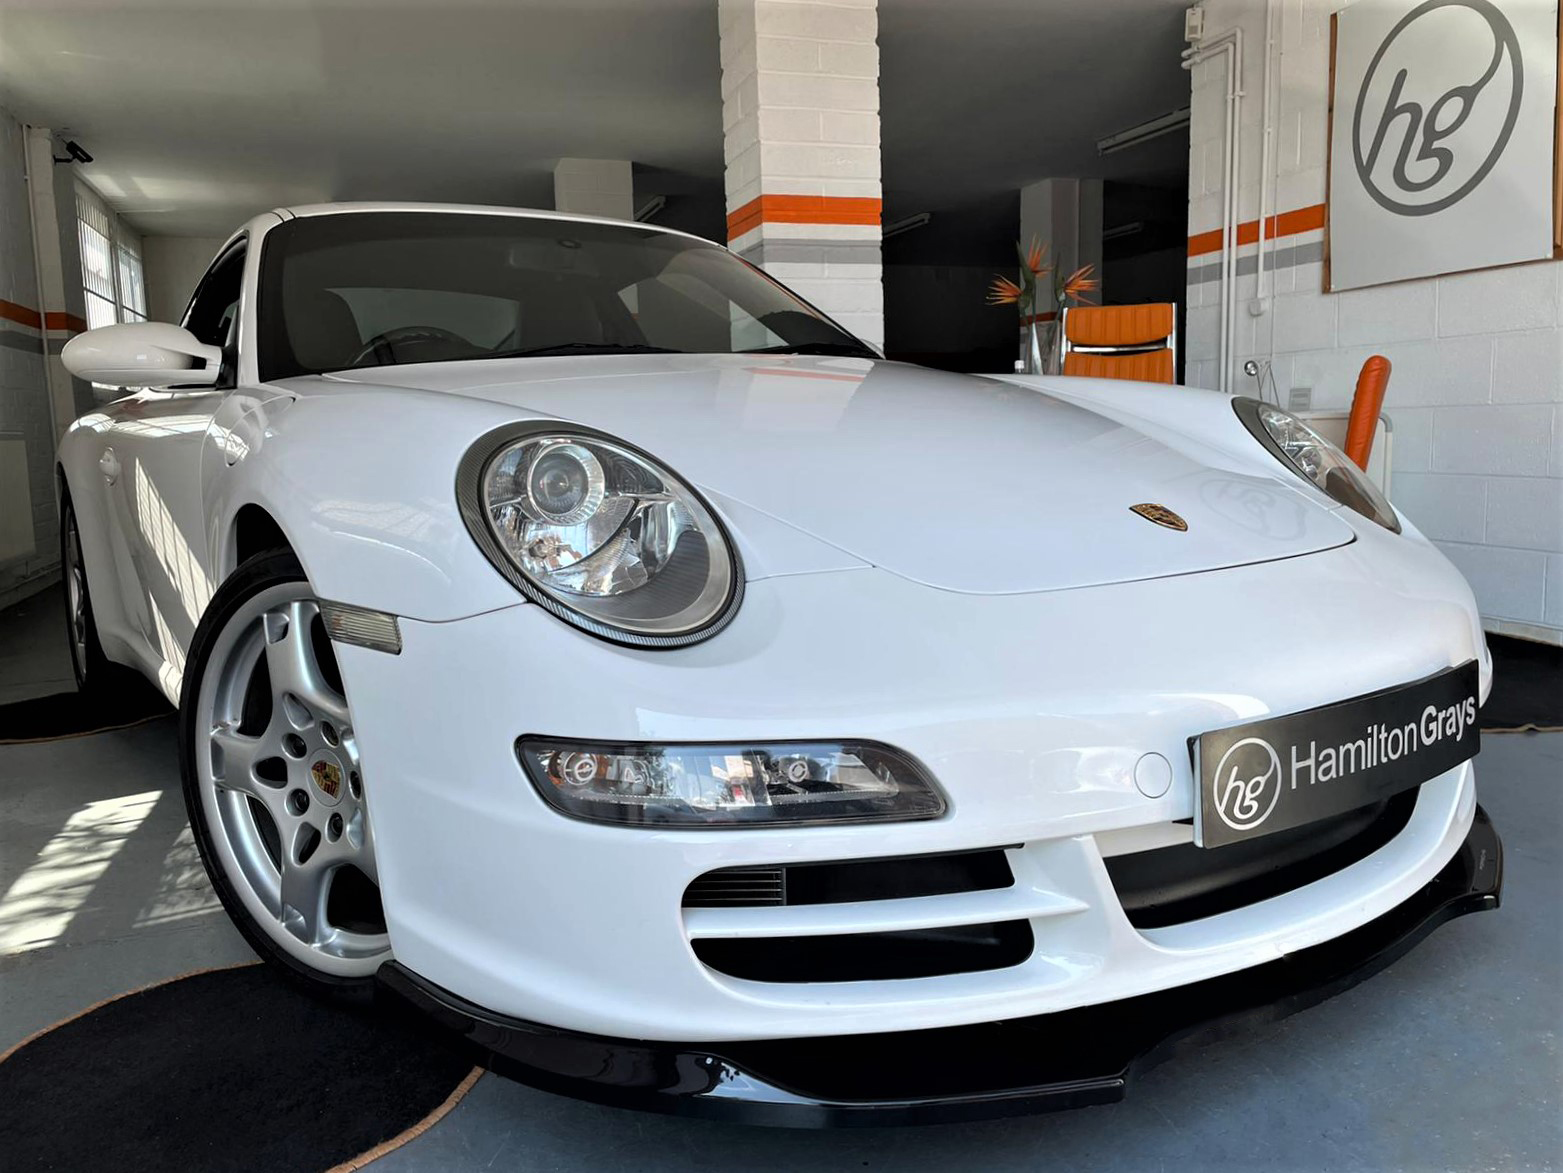 2006 (56) Porsche 911 3.6 [997] Carrera 2 Manual. In Rare Carrara White Metallic with Full Black Leather. 123k, Documented History. Just Serviced 4/21. (SOLD)